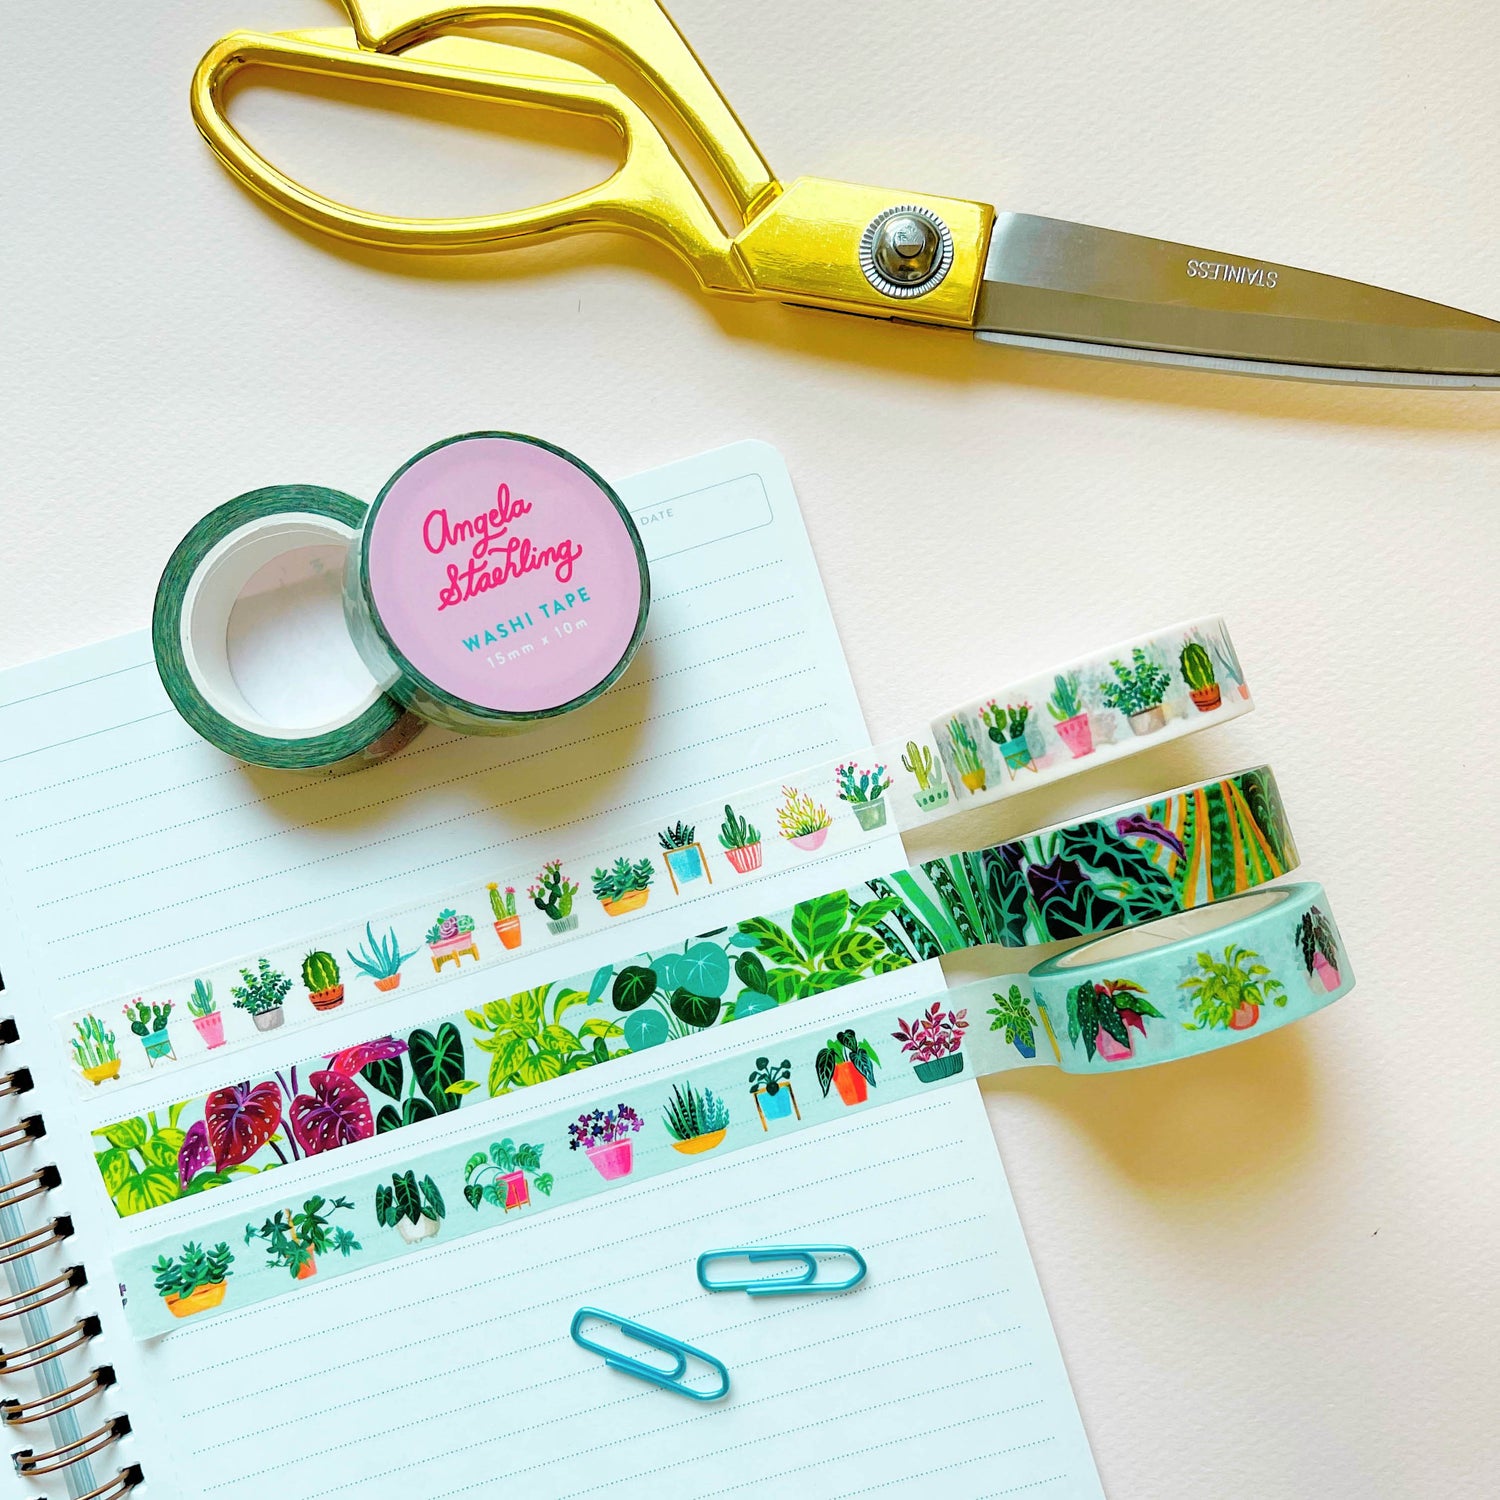 Three rolls of plant washi tape with scissors and paper clips